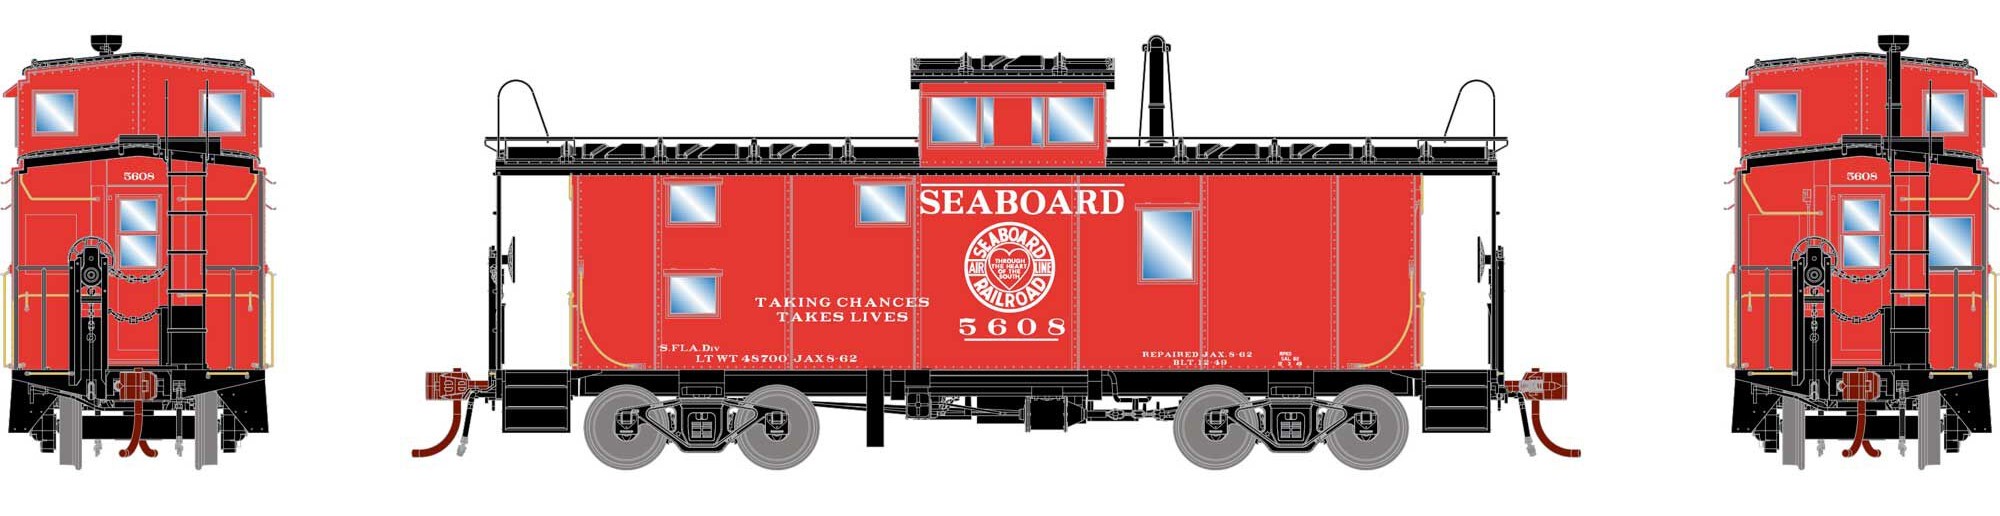 Athearn Genesis HO ATHG78390 DCC/Tsunami Soundcar Equipped ICC Caboose with Lights & Sound Seaboard SAL #5608